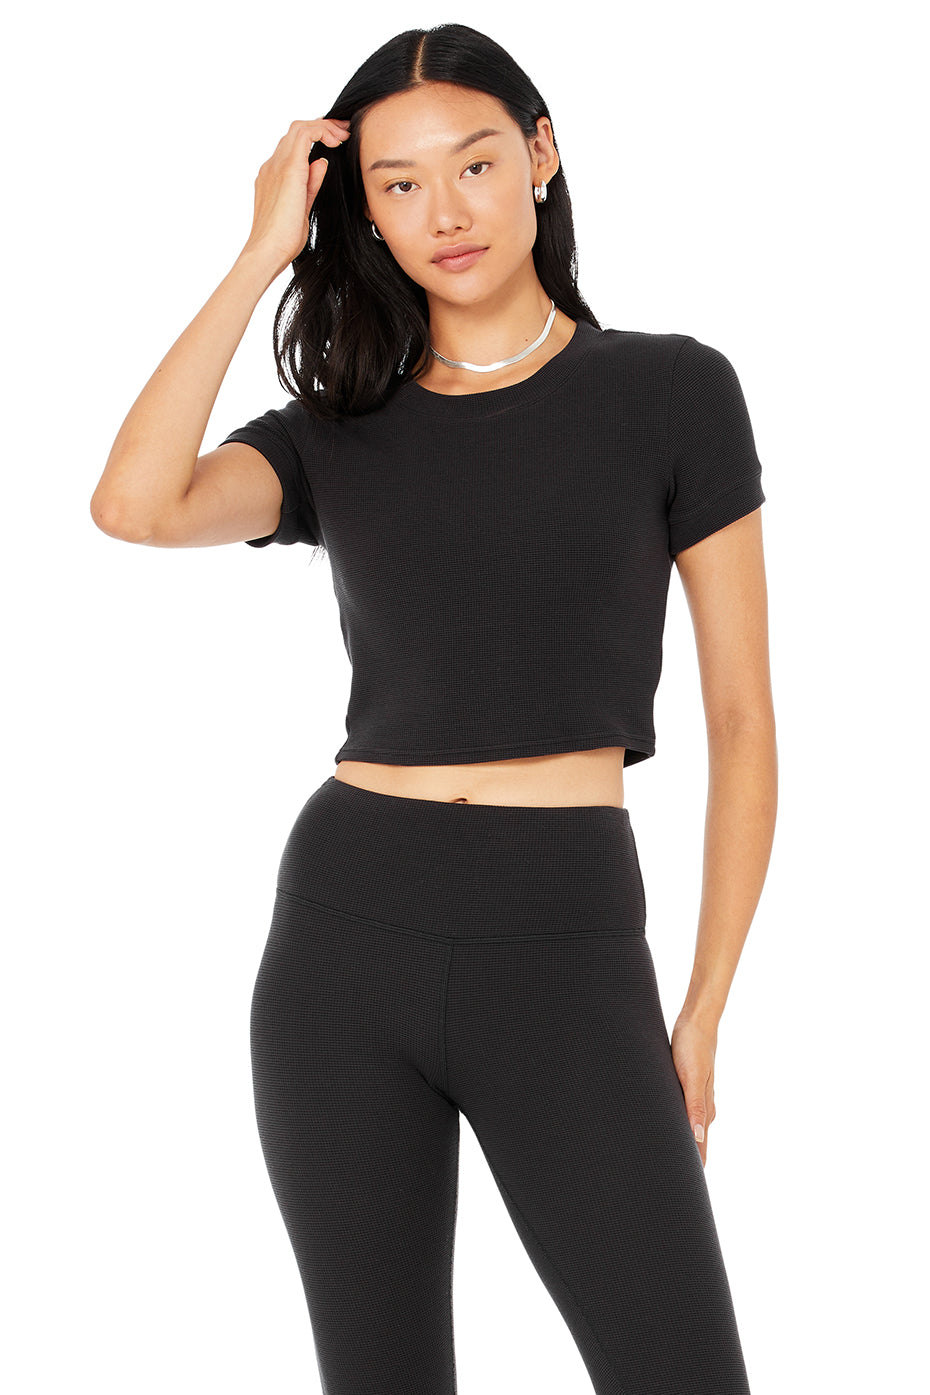 Athletic Top by Alo Yoga (Dreamer Short Sleeve Top) size small, black color